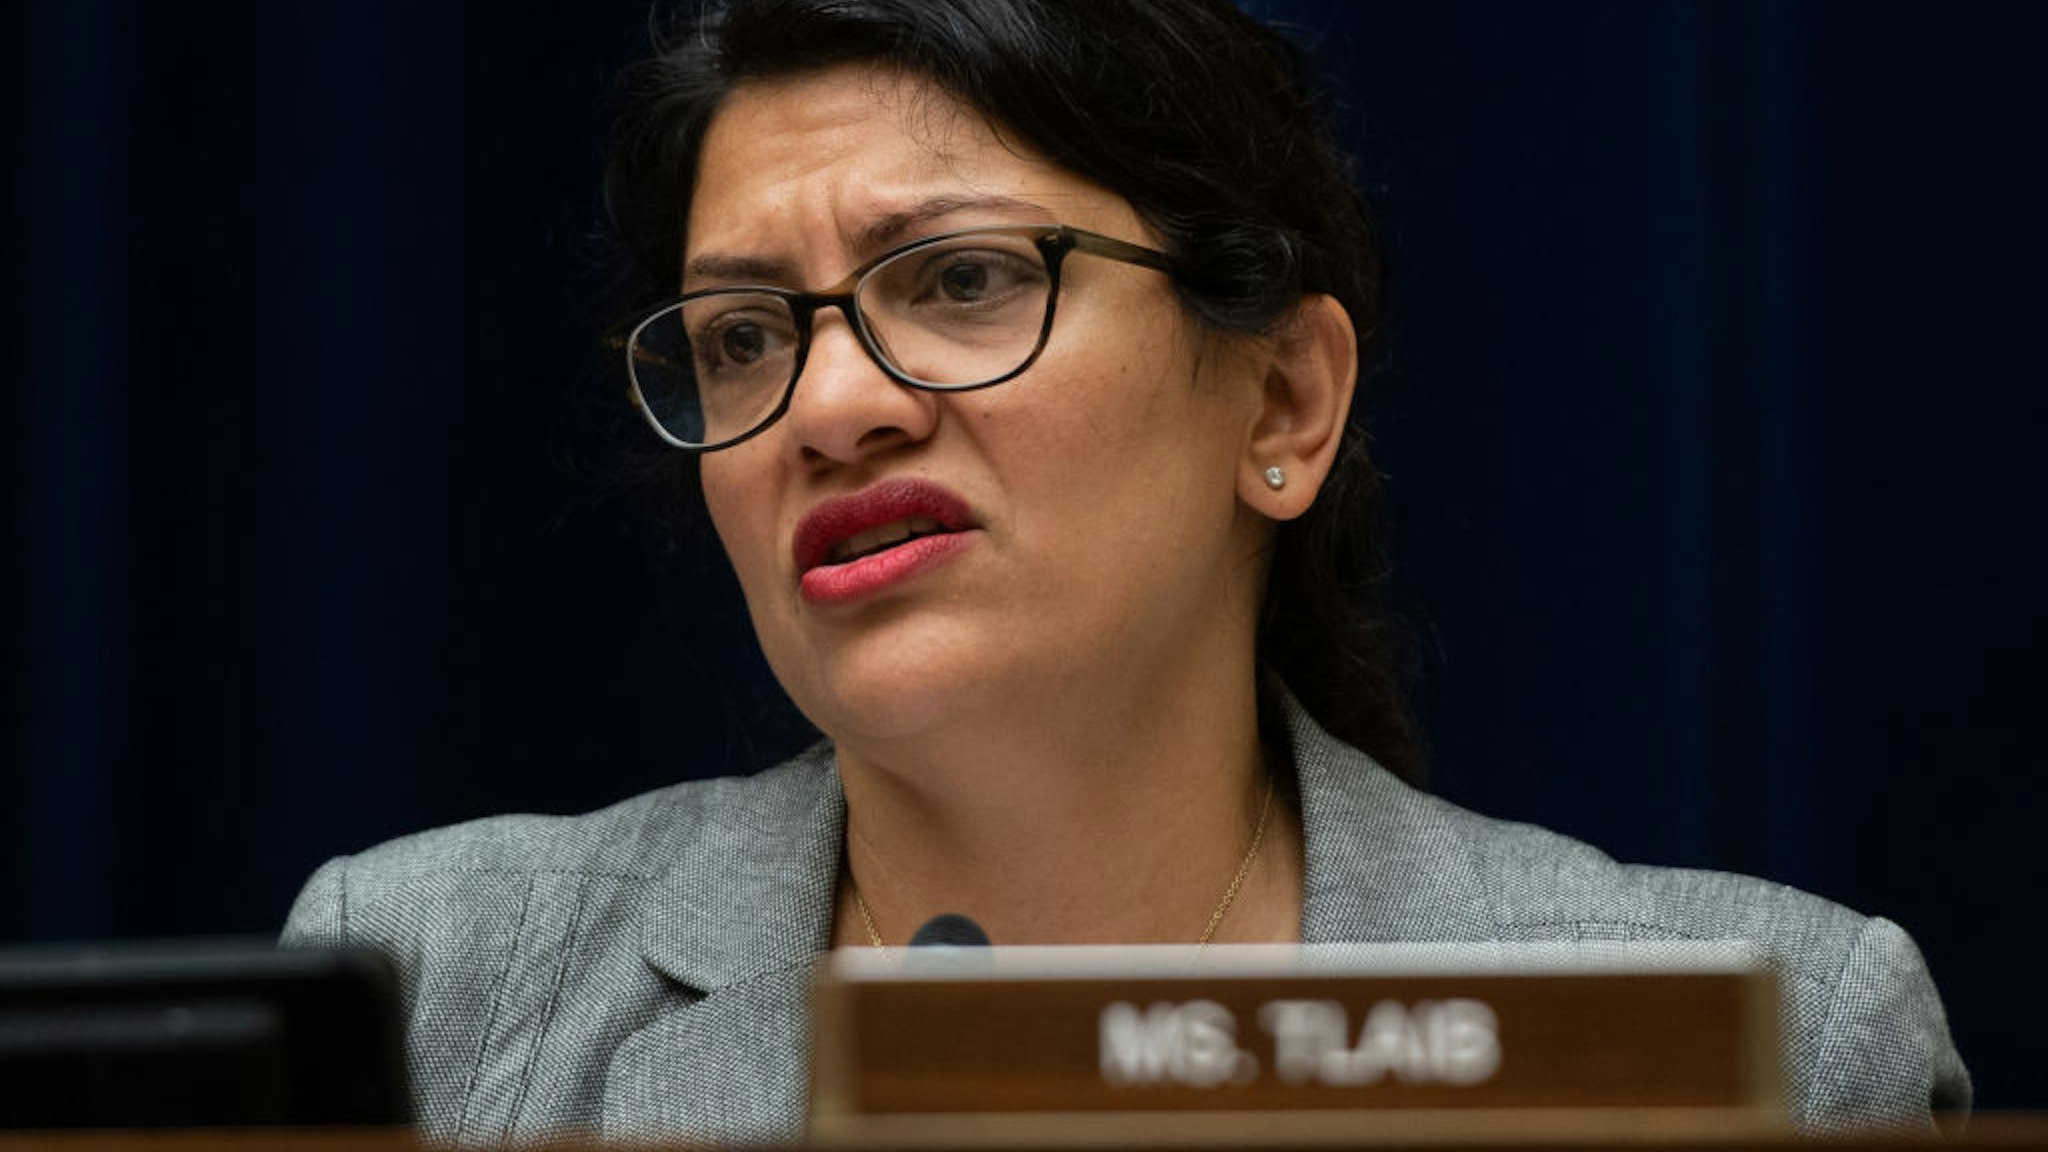 US Representative Rashida Tlaib, Democrat of Michigan, questions US Acting Secretary of Homeland Security Kevin McAleenan during a House Oversight and Reform Committee hearing on Capitol Hill in Washington, DC, July 18, 2019.